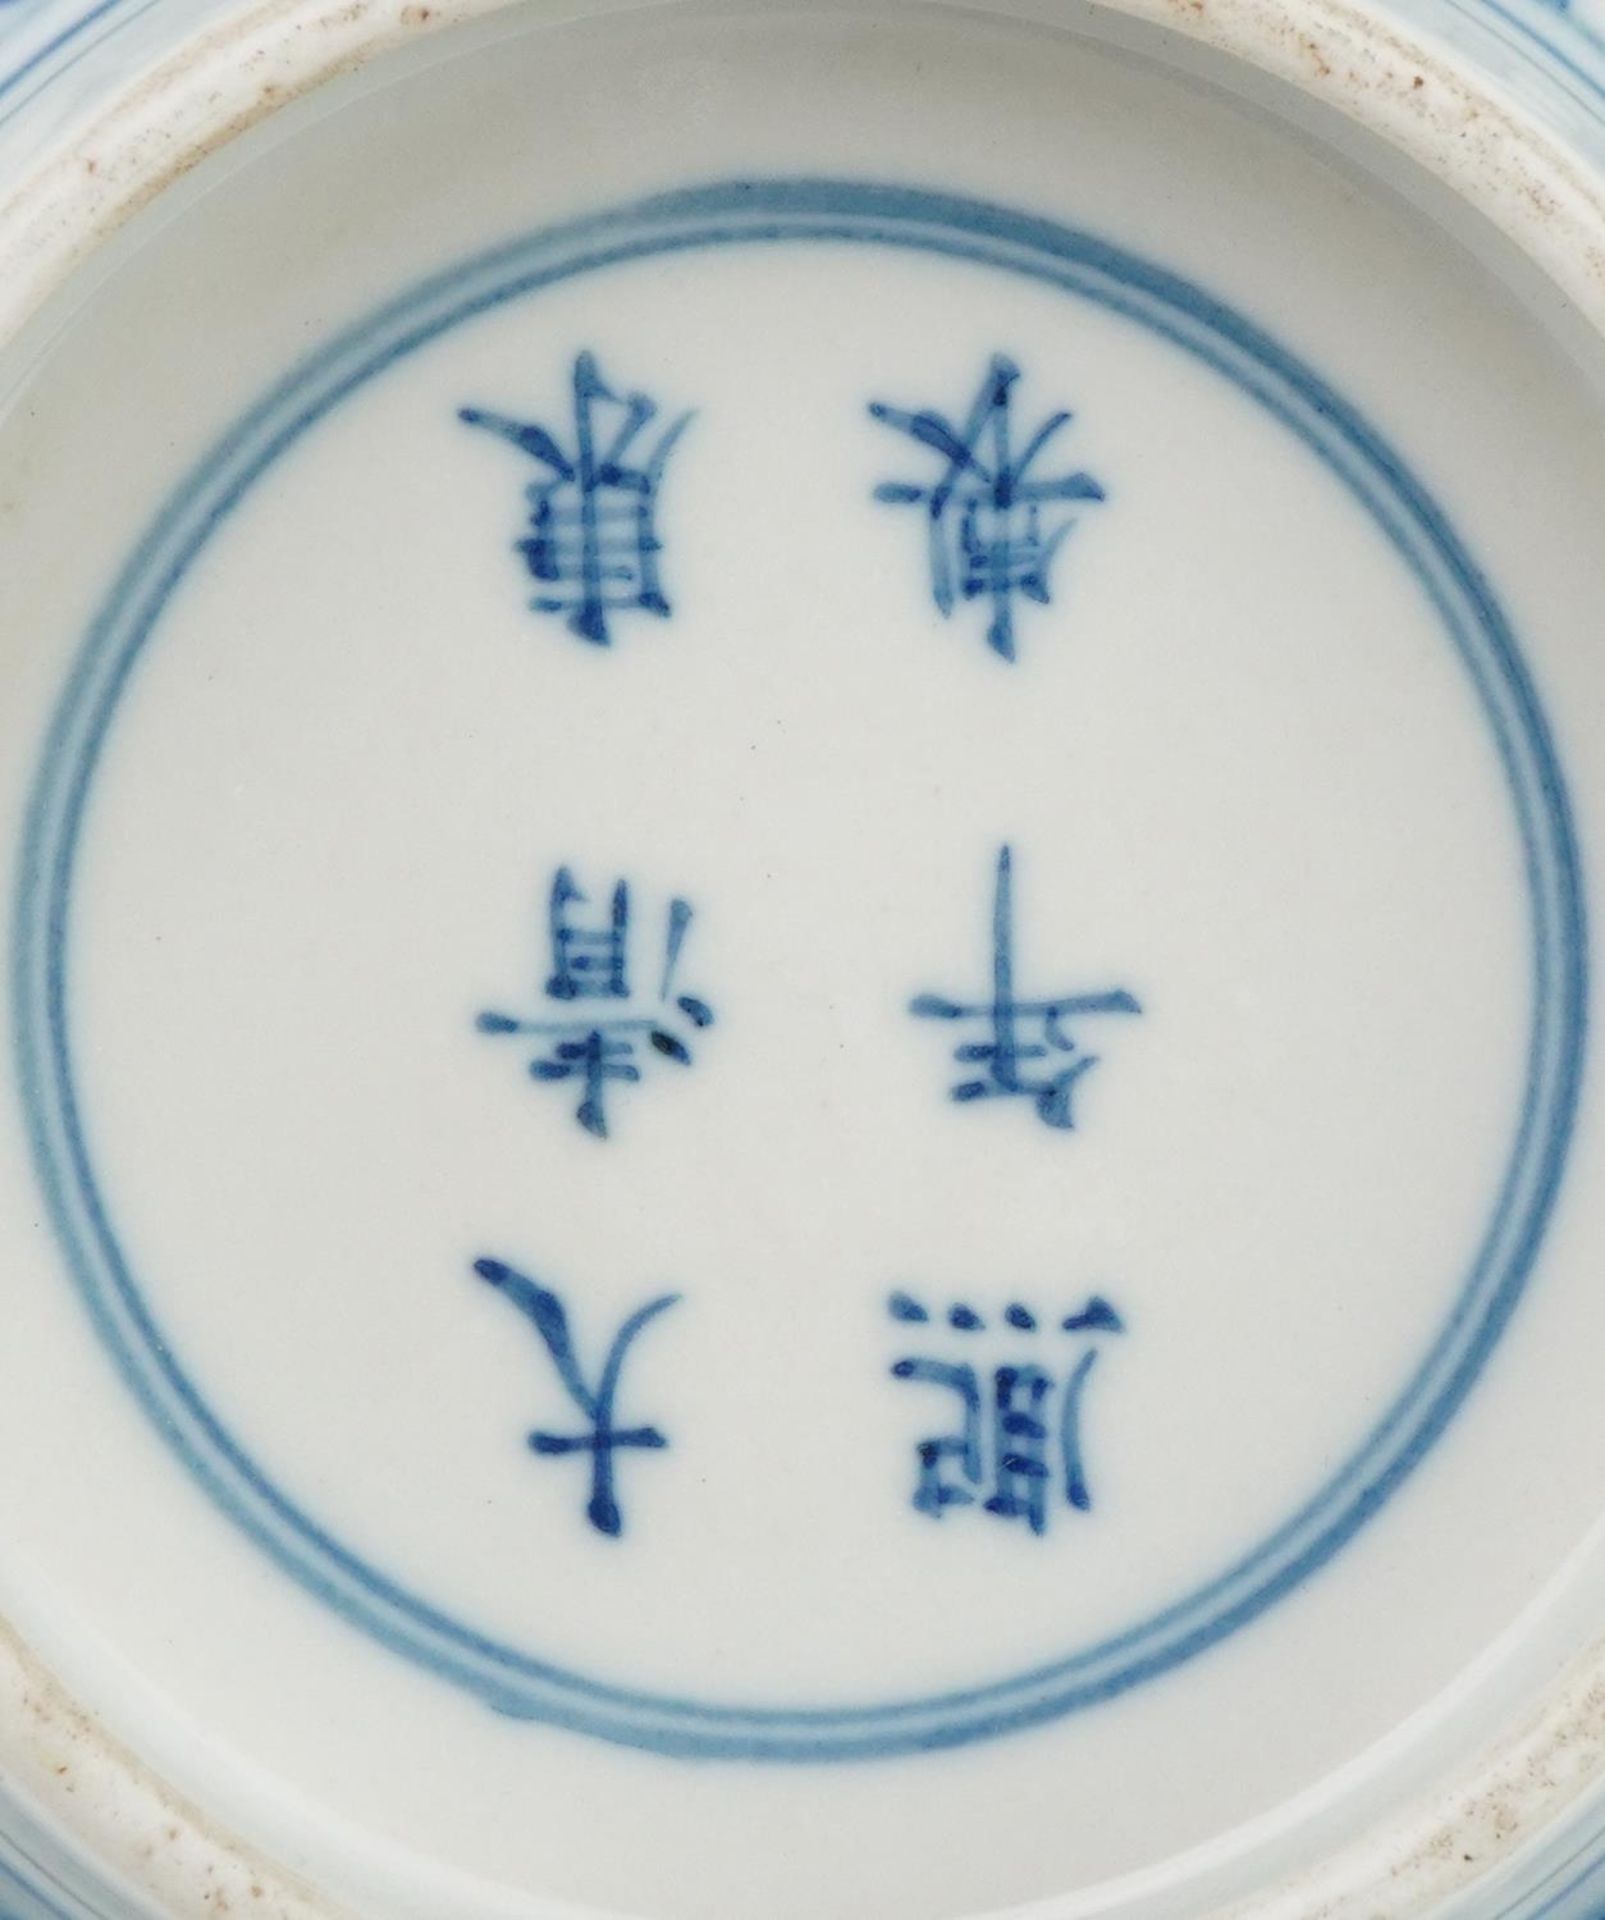 Chinese porcelain footed bowl hand painted with immortals above crashing waves, six figure character - Image 7 of 7